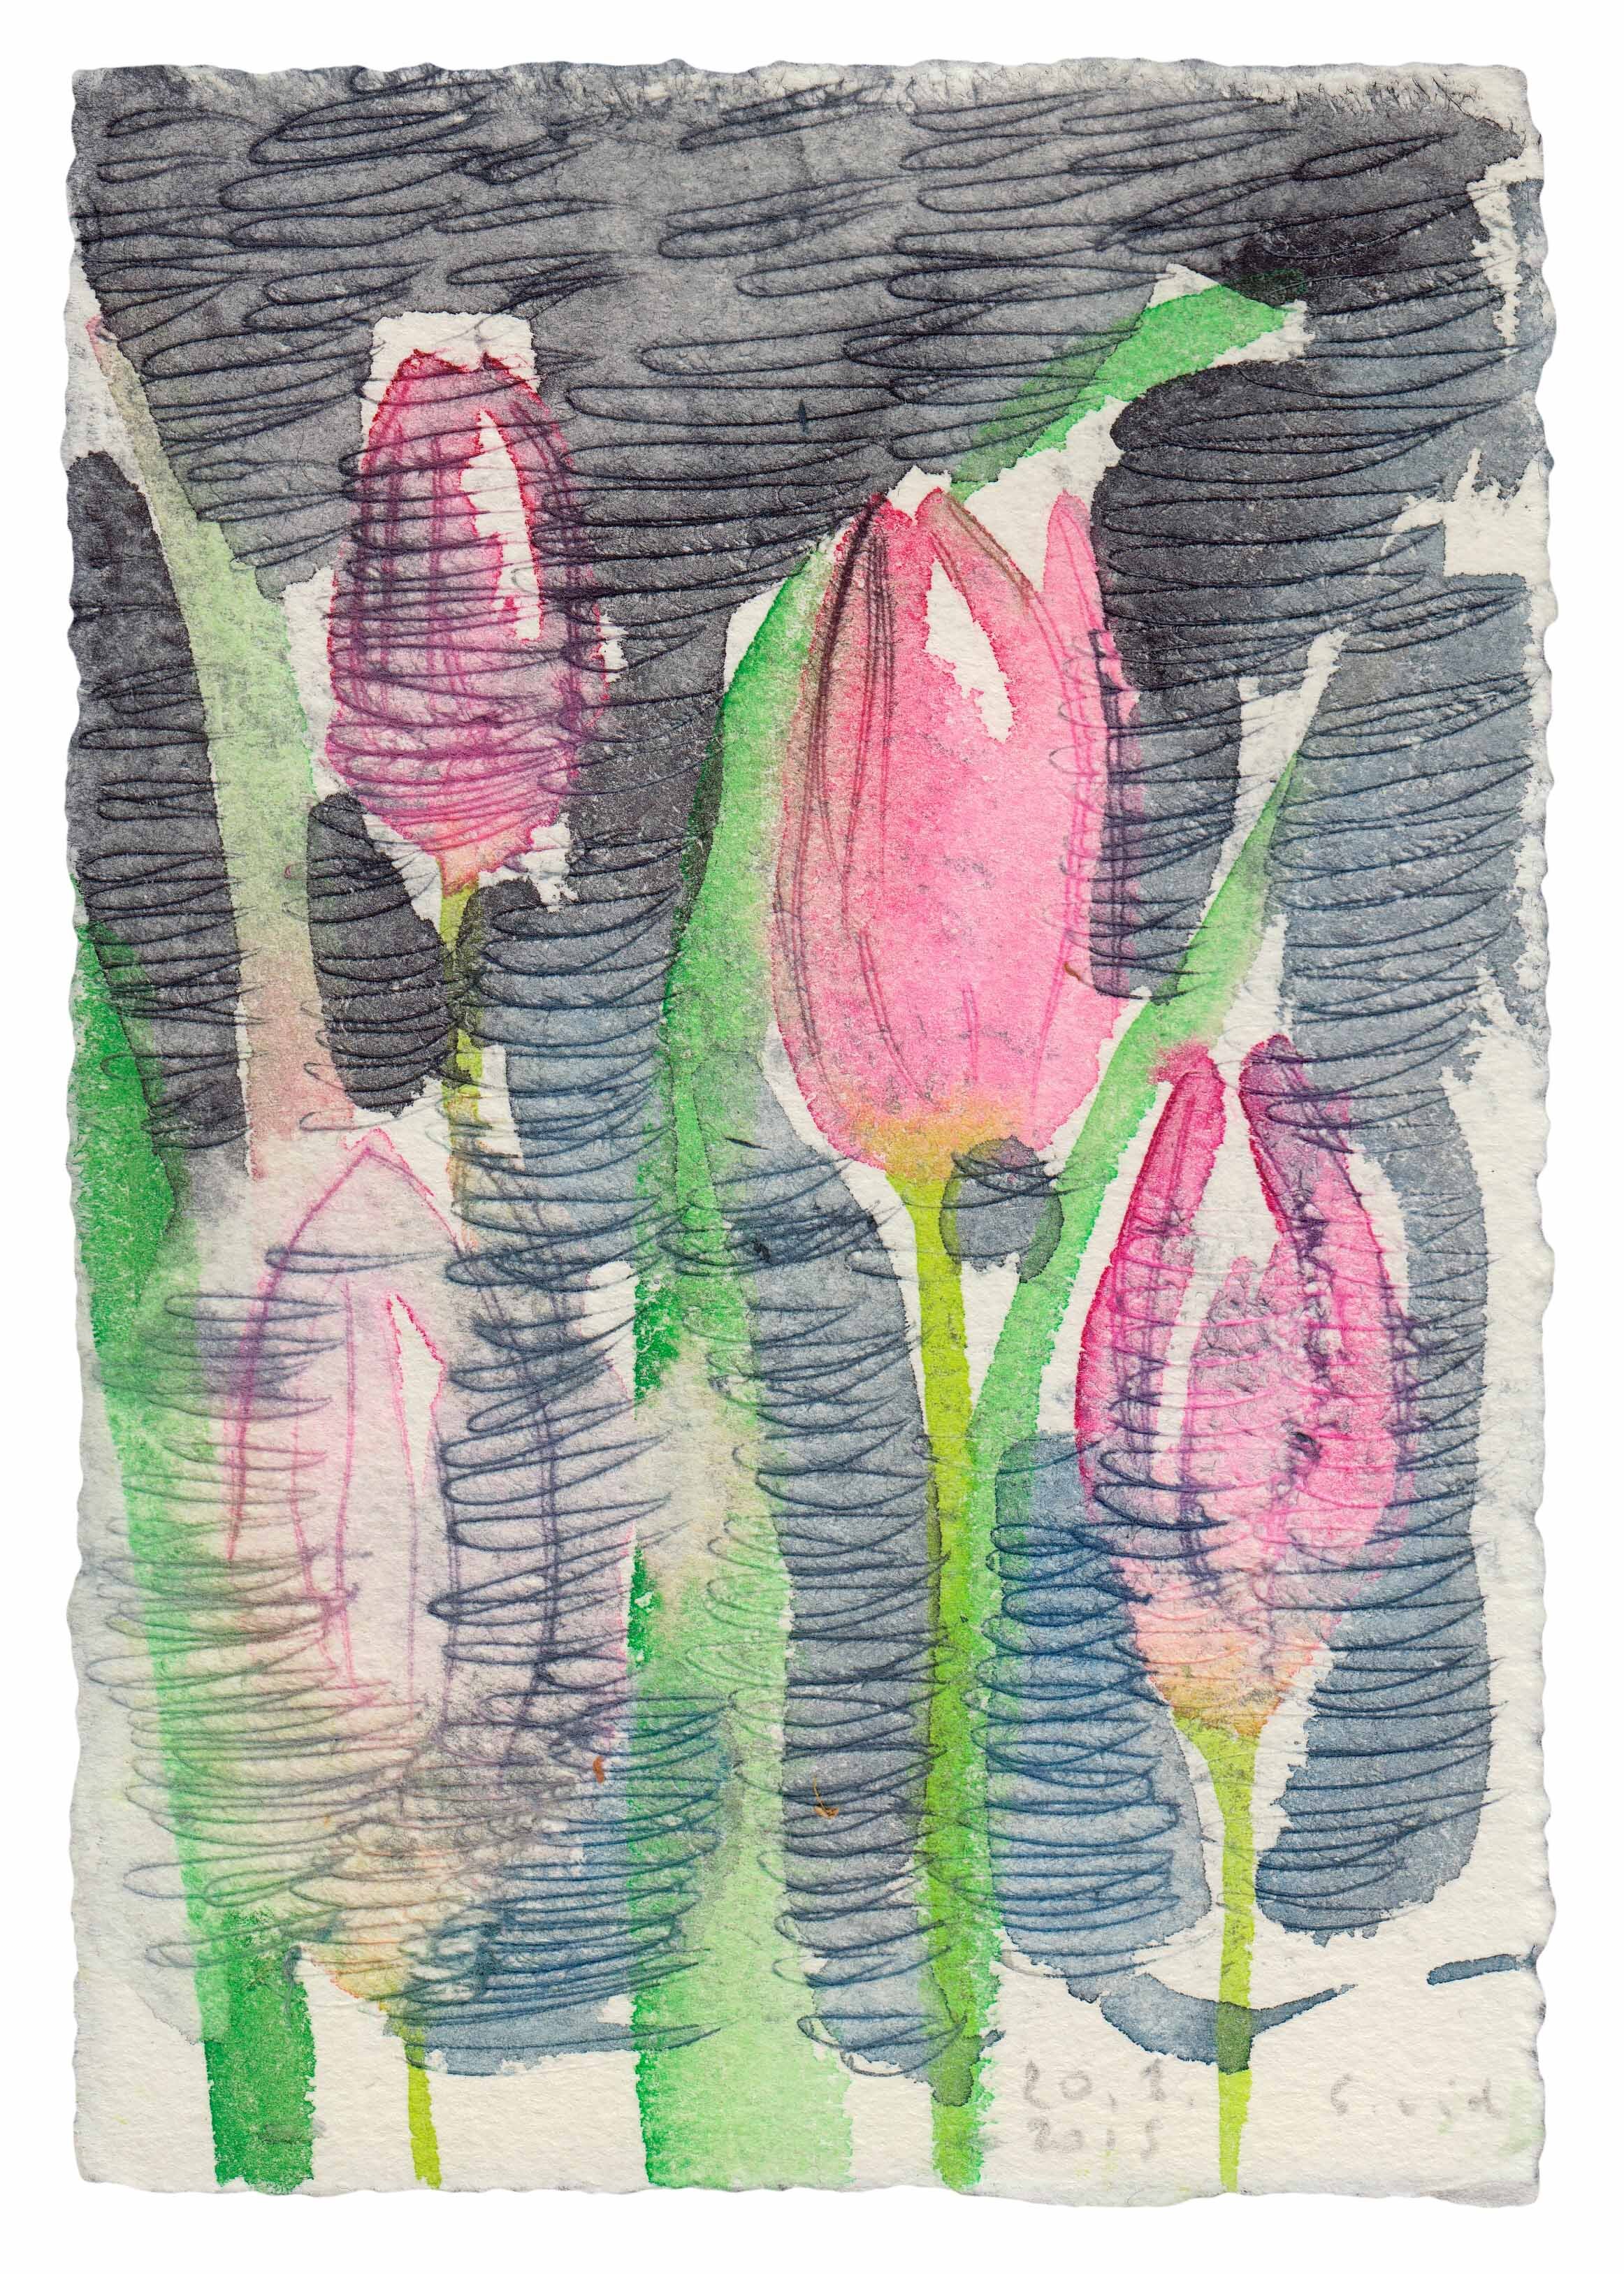  13 × 9 cm, Ink and Aquarell on Paper, 2015 